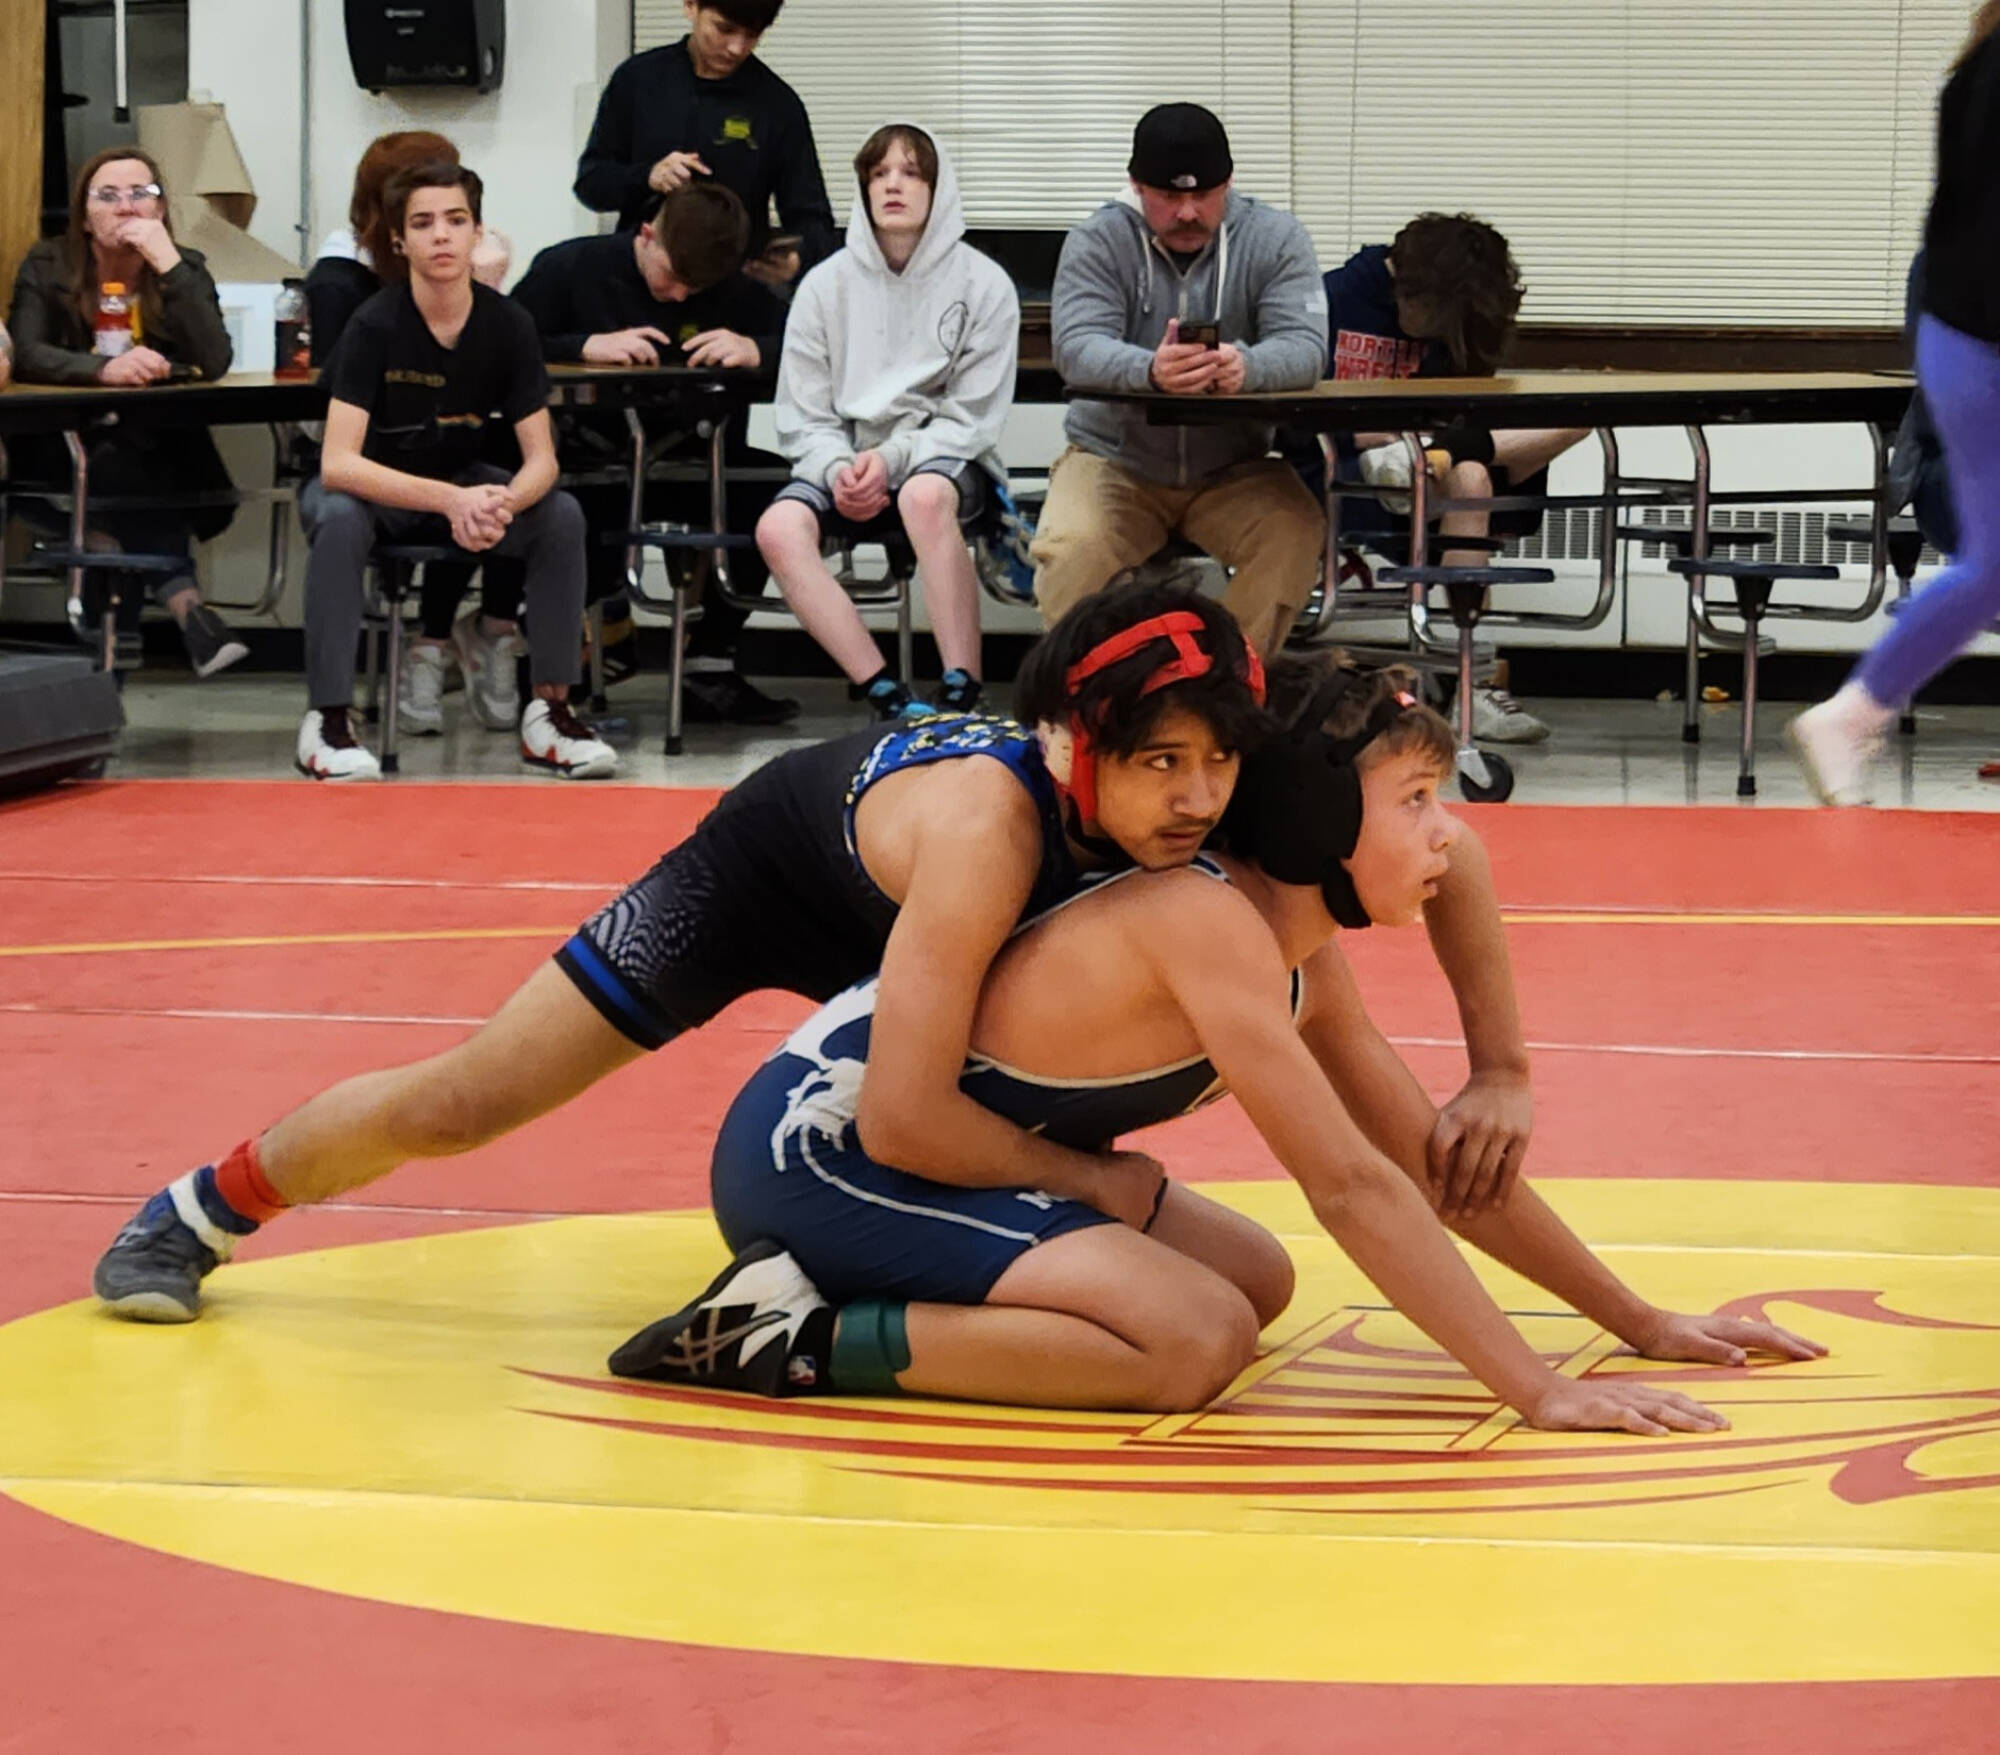 Emanual Canales Ortiz of the Juneau Youth Wrestling Club prepares for second period against Dawson Folcik of Palmer on March 3-4 in Fairbanks. (Courtesy Photo / Melinda Messmer)